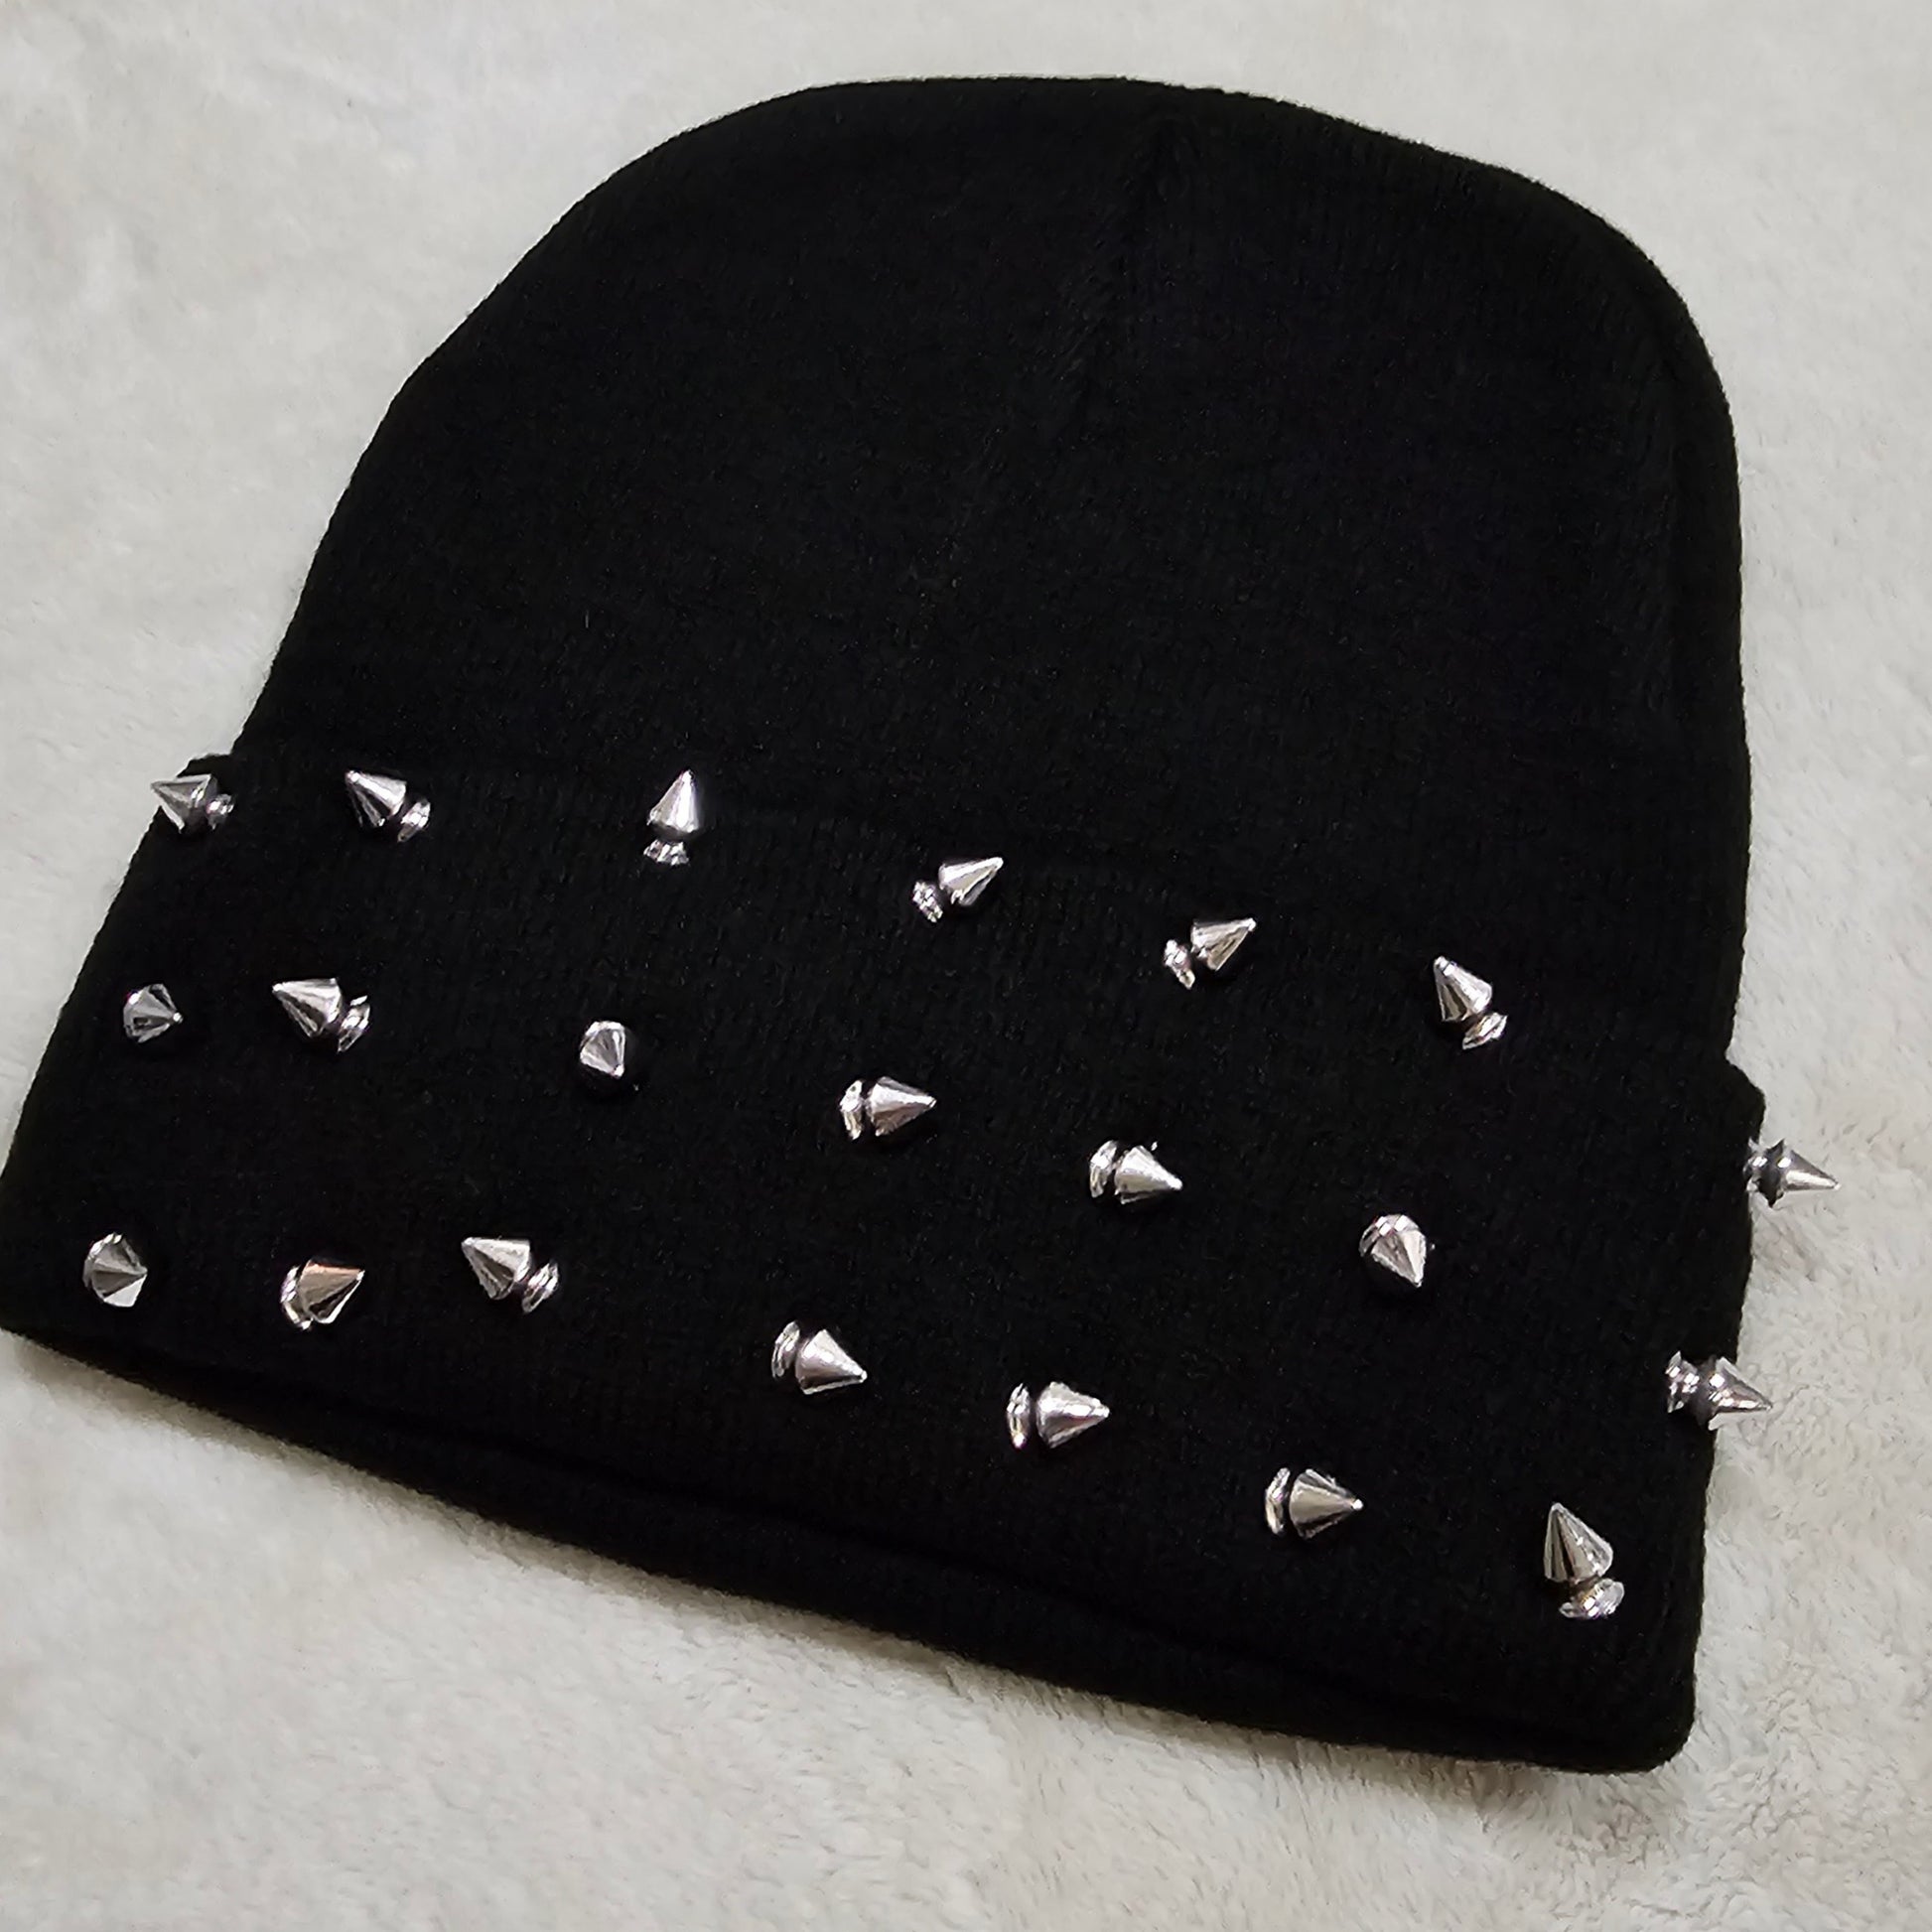 Black Ribbed Knit Beanie | Fold Over With Spiked Studs On front - Widow - Beanies